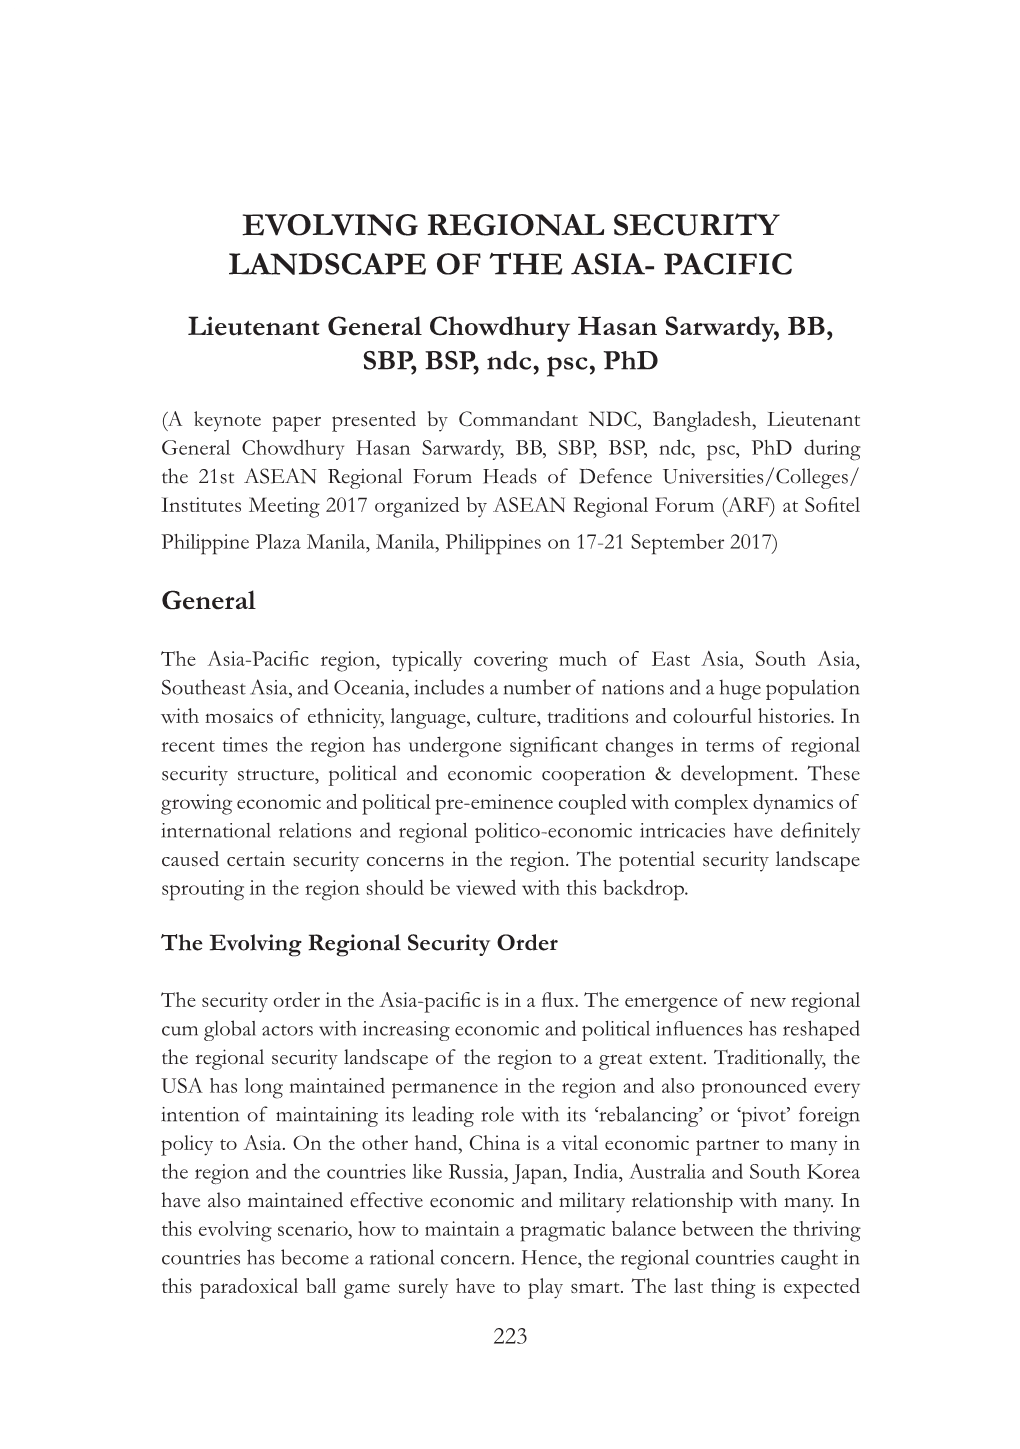 Evolving Regional Security Landscape of the Asia- Pacific